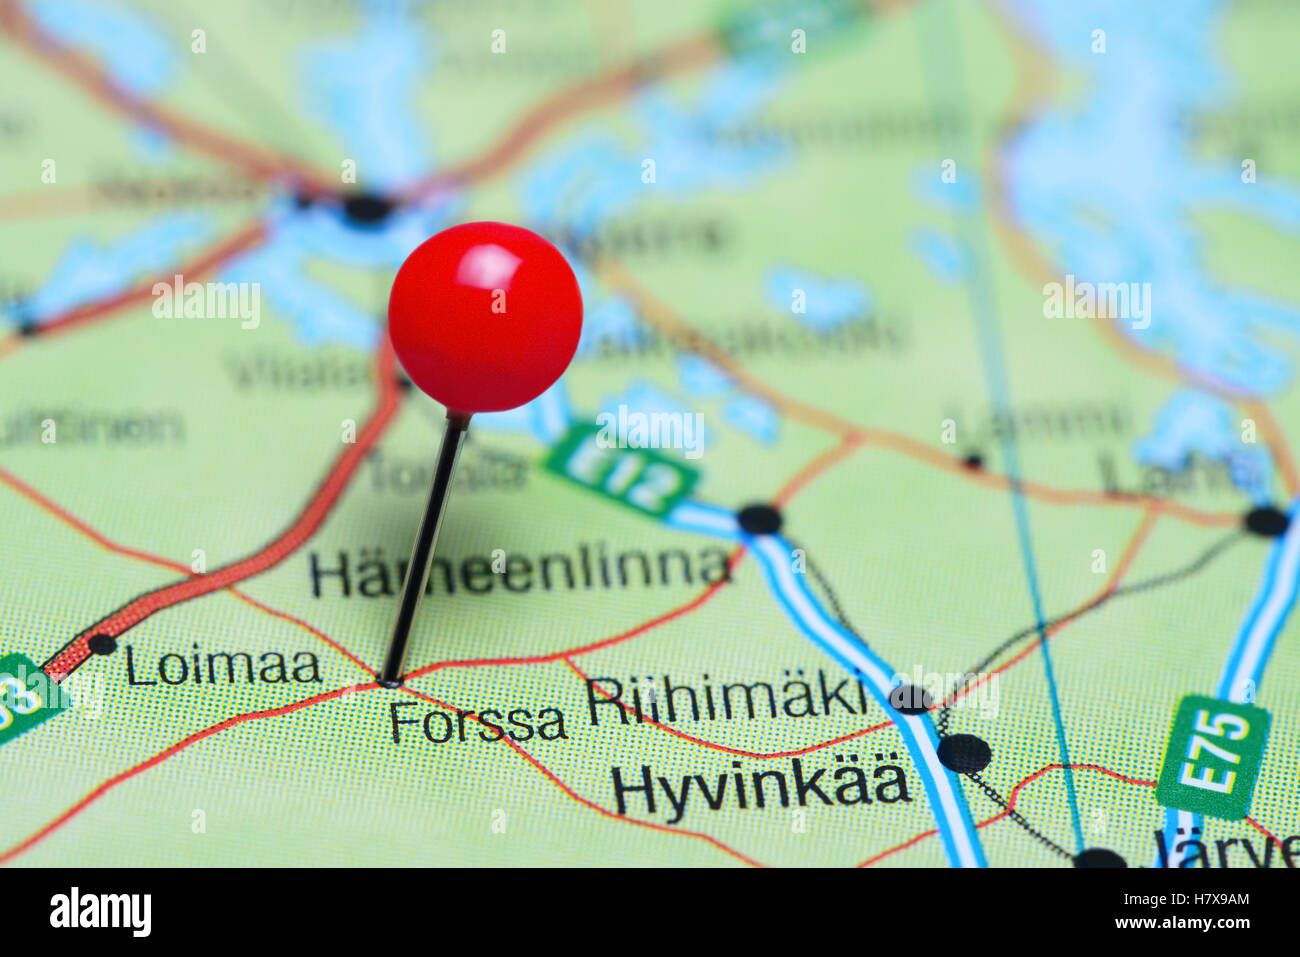 Forssa pinned on a map of Finland Stock Photo